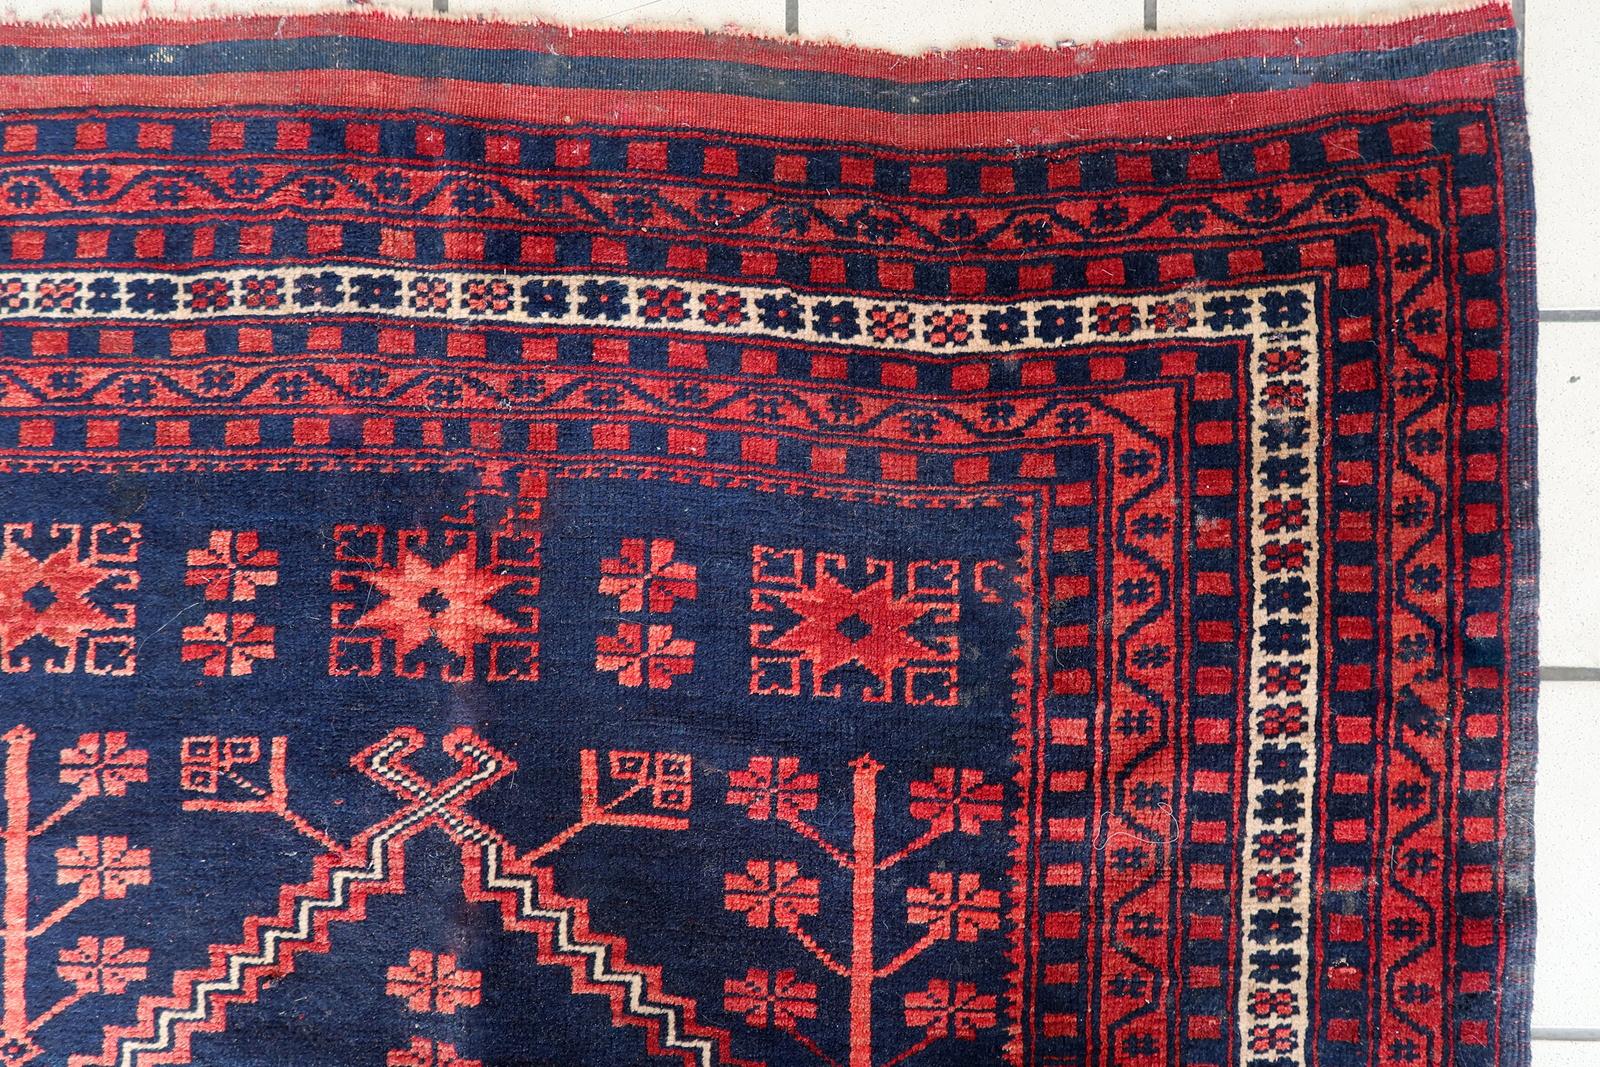 Elevate your space with the timeless allure of this Handmade Vintage Caucasian Karabagh Rug. Dating back to the 1940s, this exquisite woolen piece measures 3.9' x 5.8' (120cm x 179cm) and is in original, good condition.

Hailing from Armenia, this